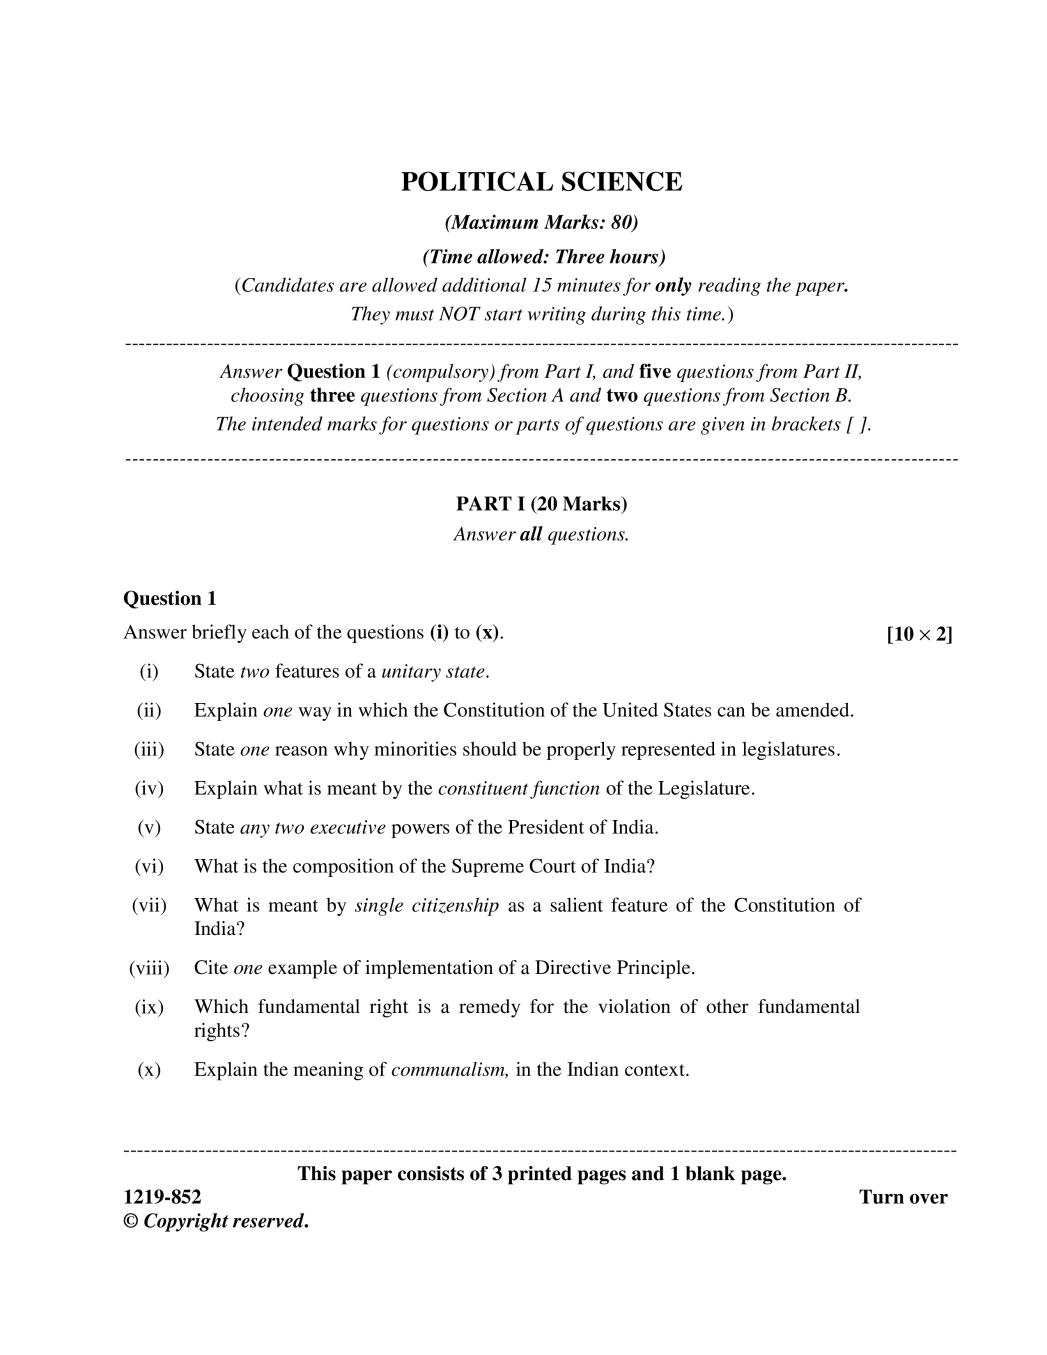 ISC Class 12 Question Paper 2019 for Political Science  - Page 1